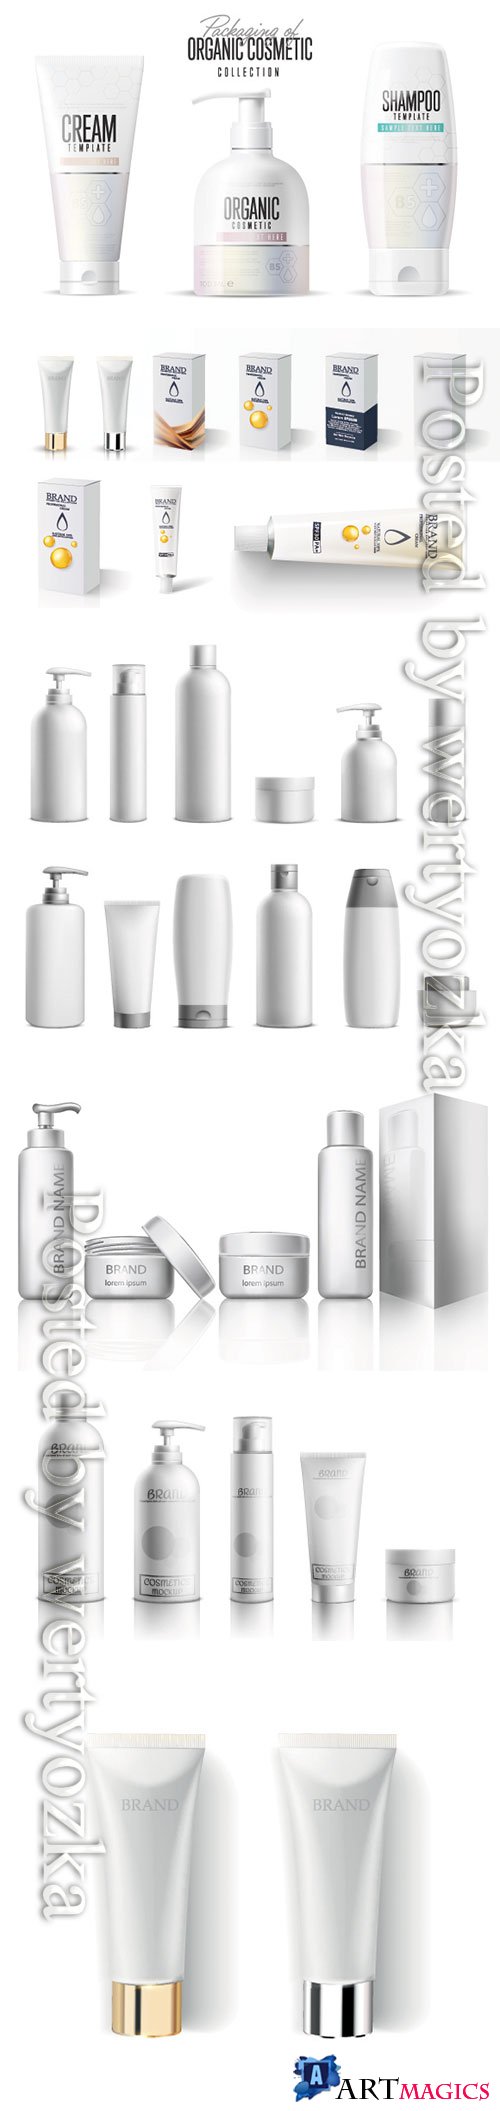 Cosmetic package mockup vector set, beauty product bottles